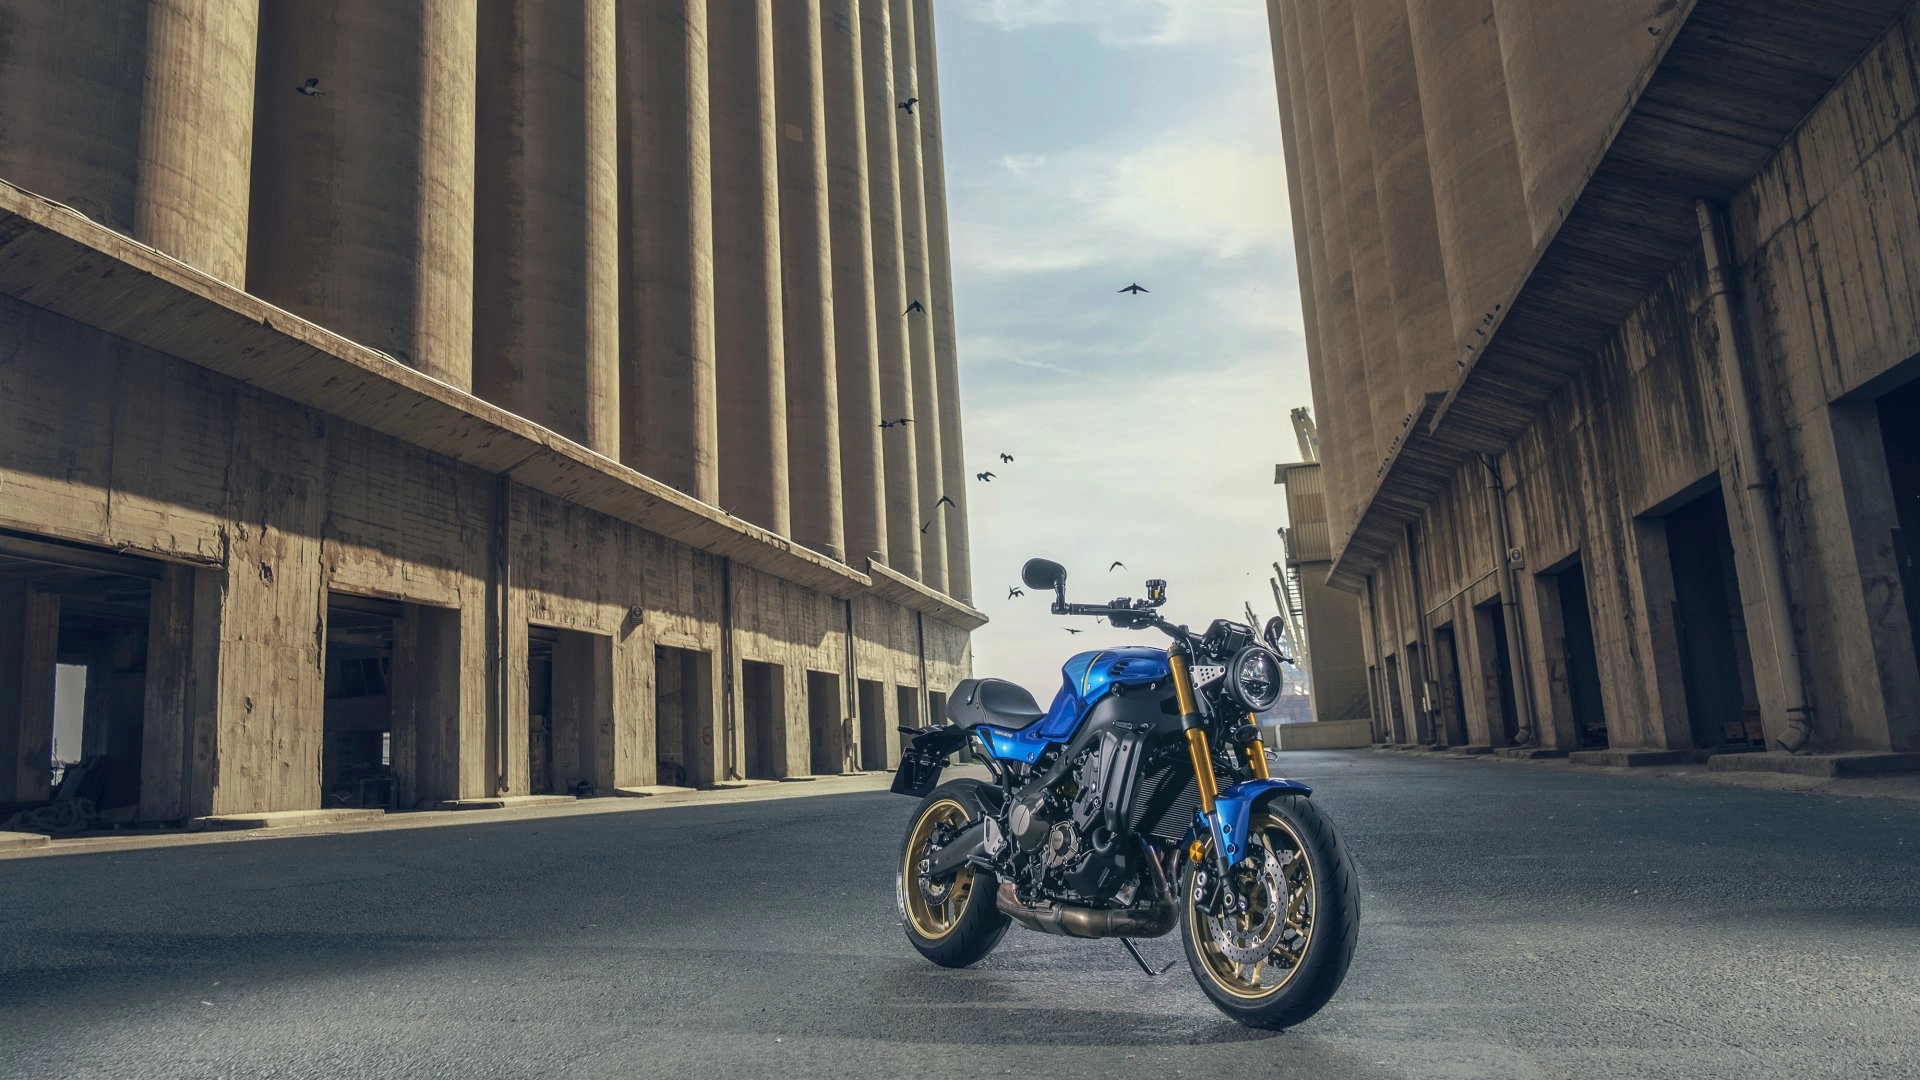 Factory Special: The new Yamaha XSR 900 GP goes into production